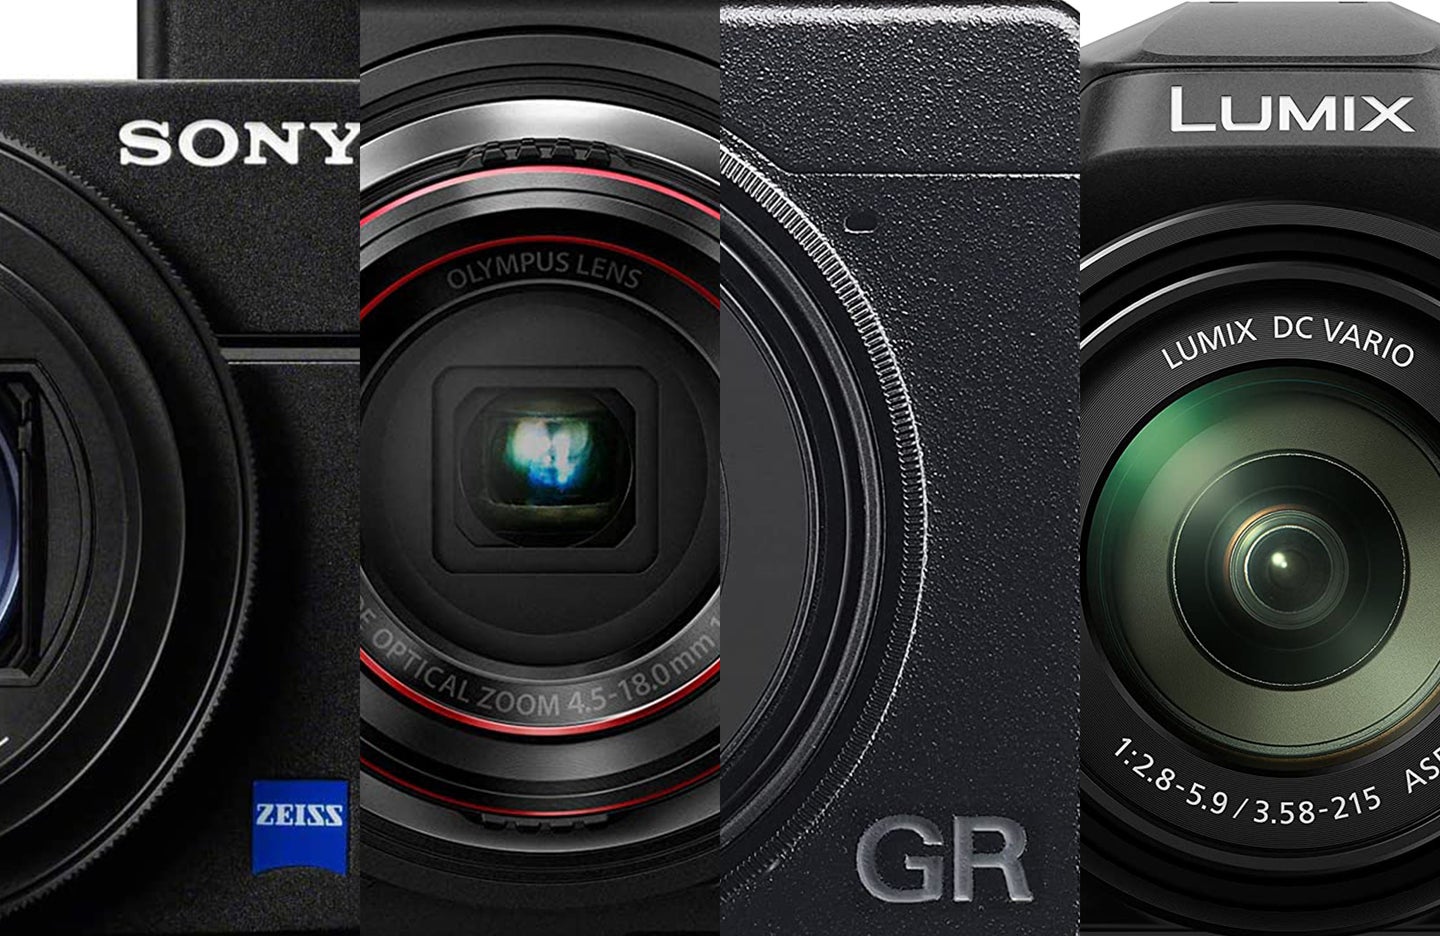 Best point-and-shoot cameras